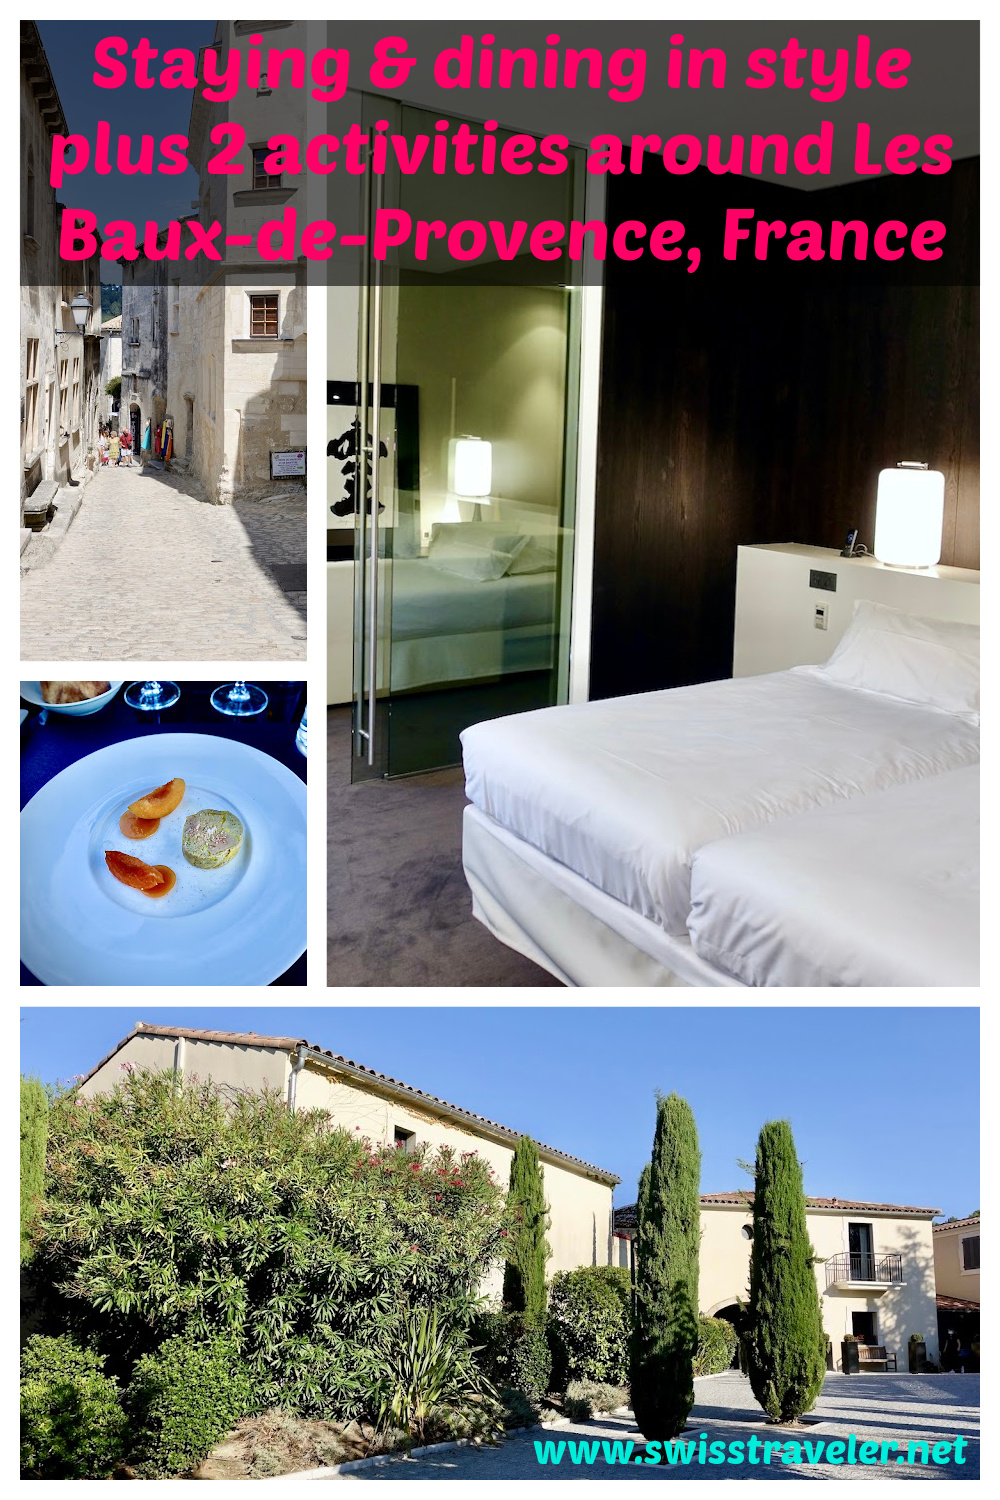 Staying & dining in style in the Provence: Hotel B Design & Spa Paradou near Les Baux-de-Provence